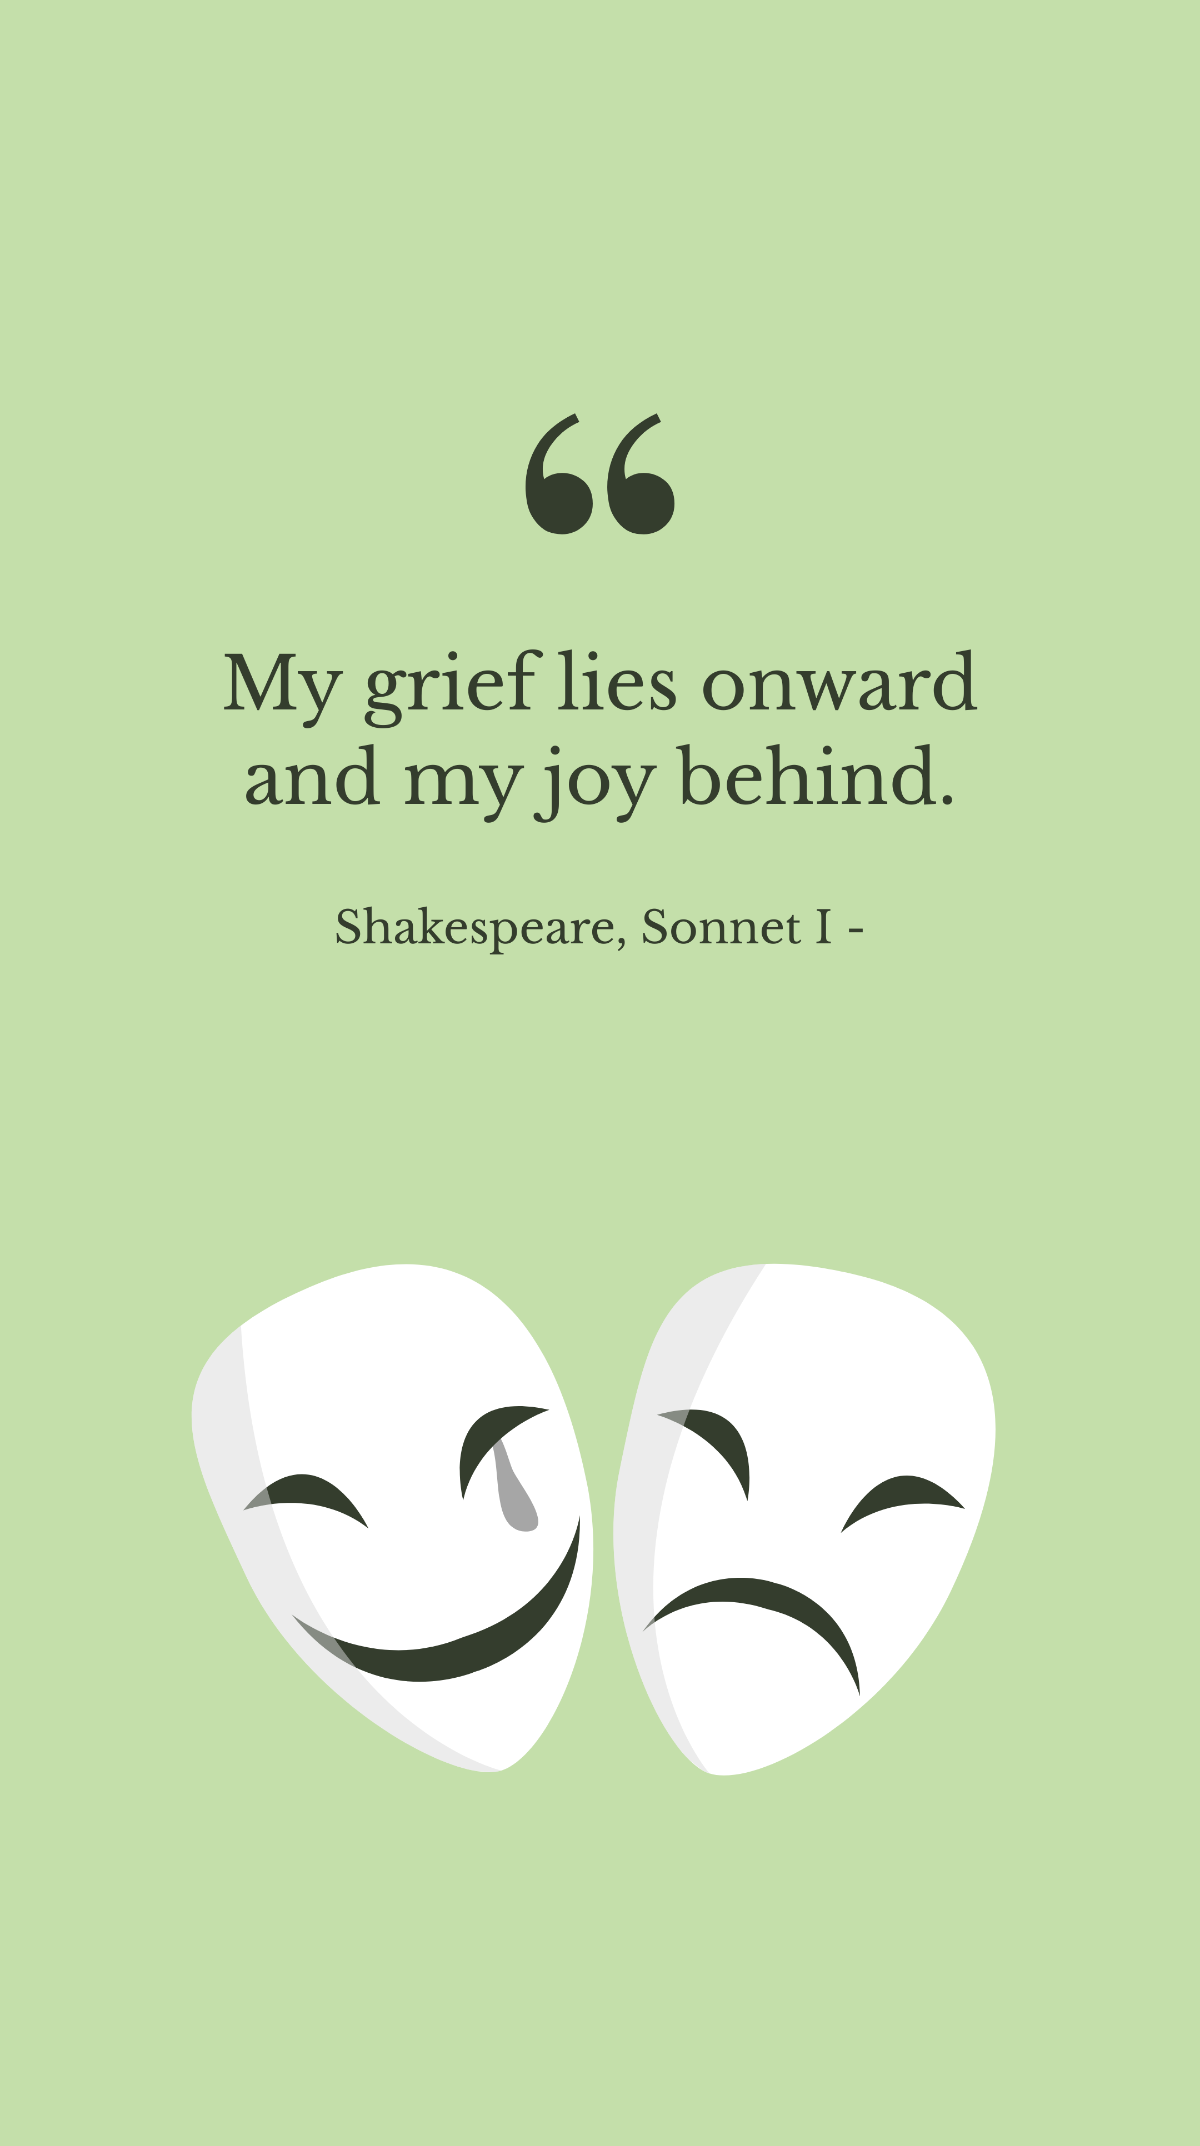 Shakespeare, Sonnet I - My grief lies onward and my joy behind.